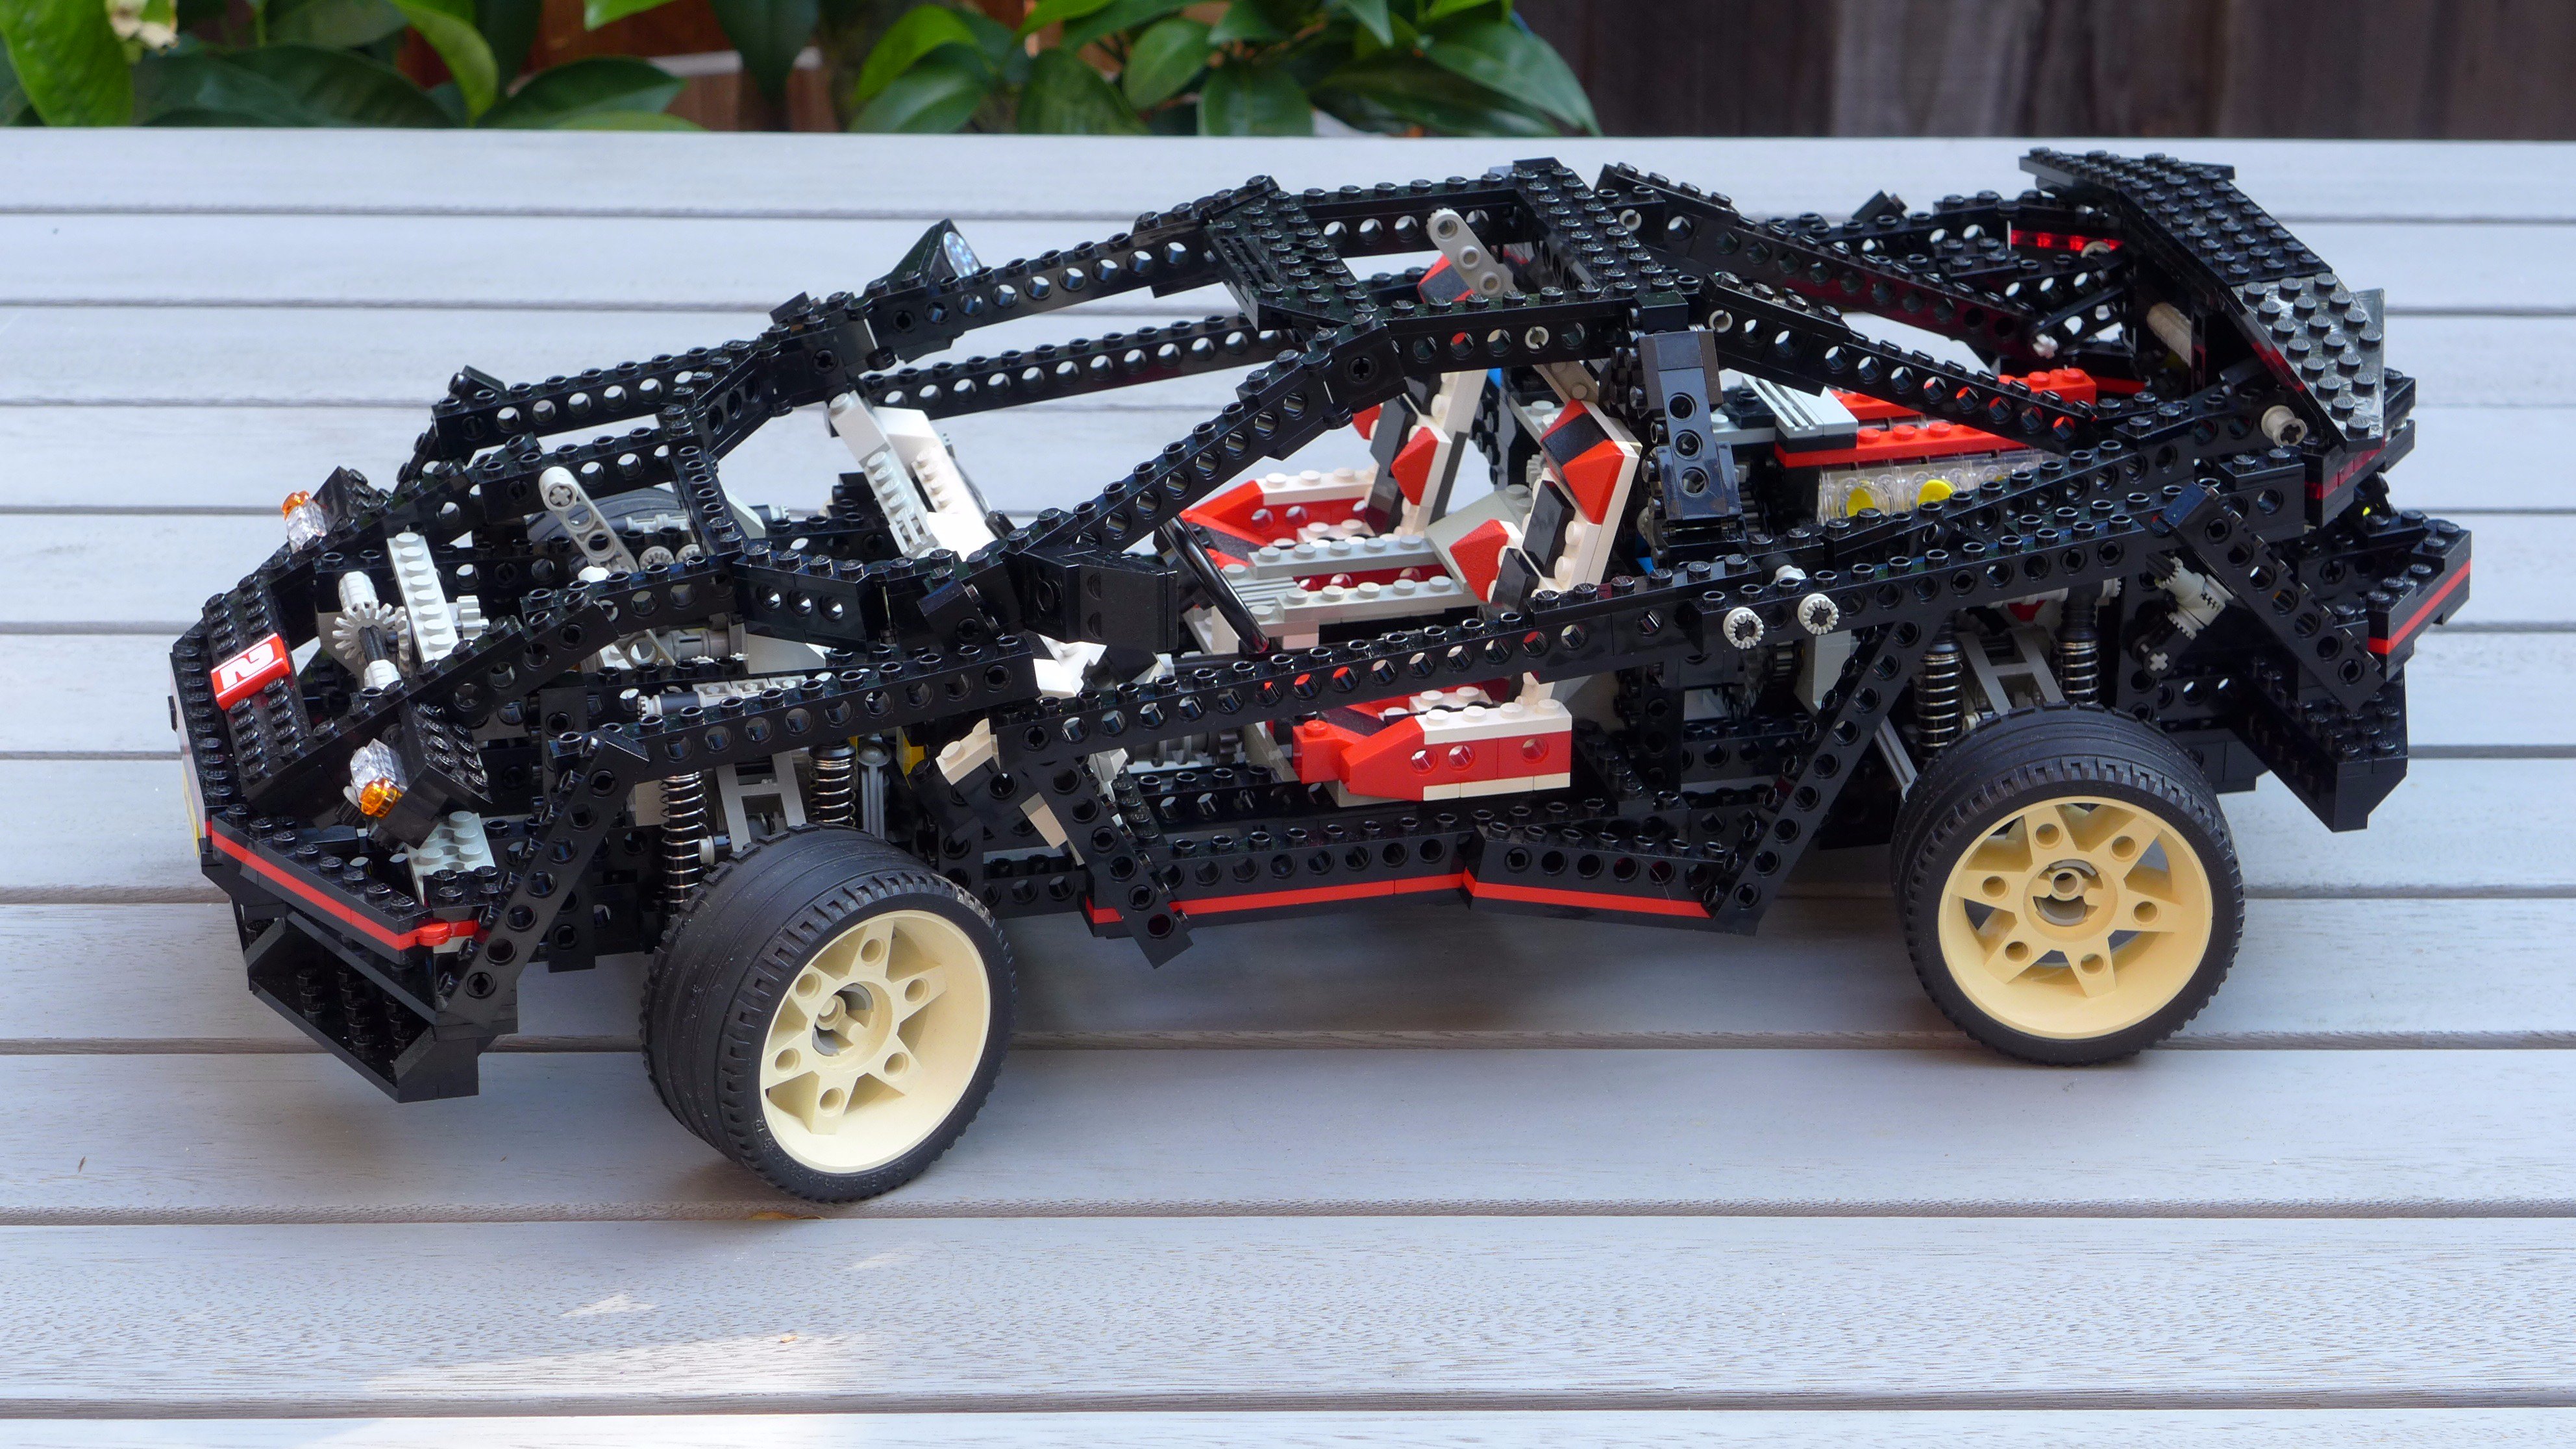 Encommium Faciliteter twinkle Sean - Charlesworth Dynamics on Twitter: "Those rare @LEGO_Group parts were  for 8880 Super Car. AWD, 4 wheel steering, 4 speed gearbox, . Missing shift  plate but looking to 3D print. https://t.co/yjUYPNu3tY" / Twitter